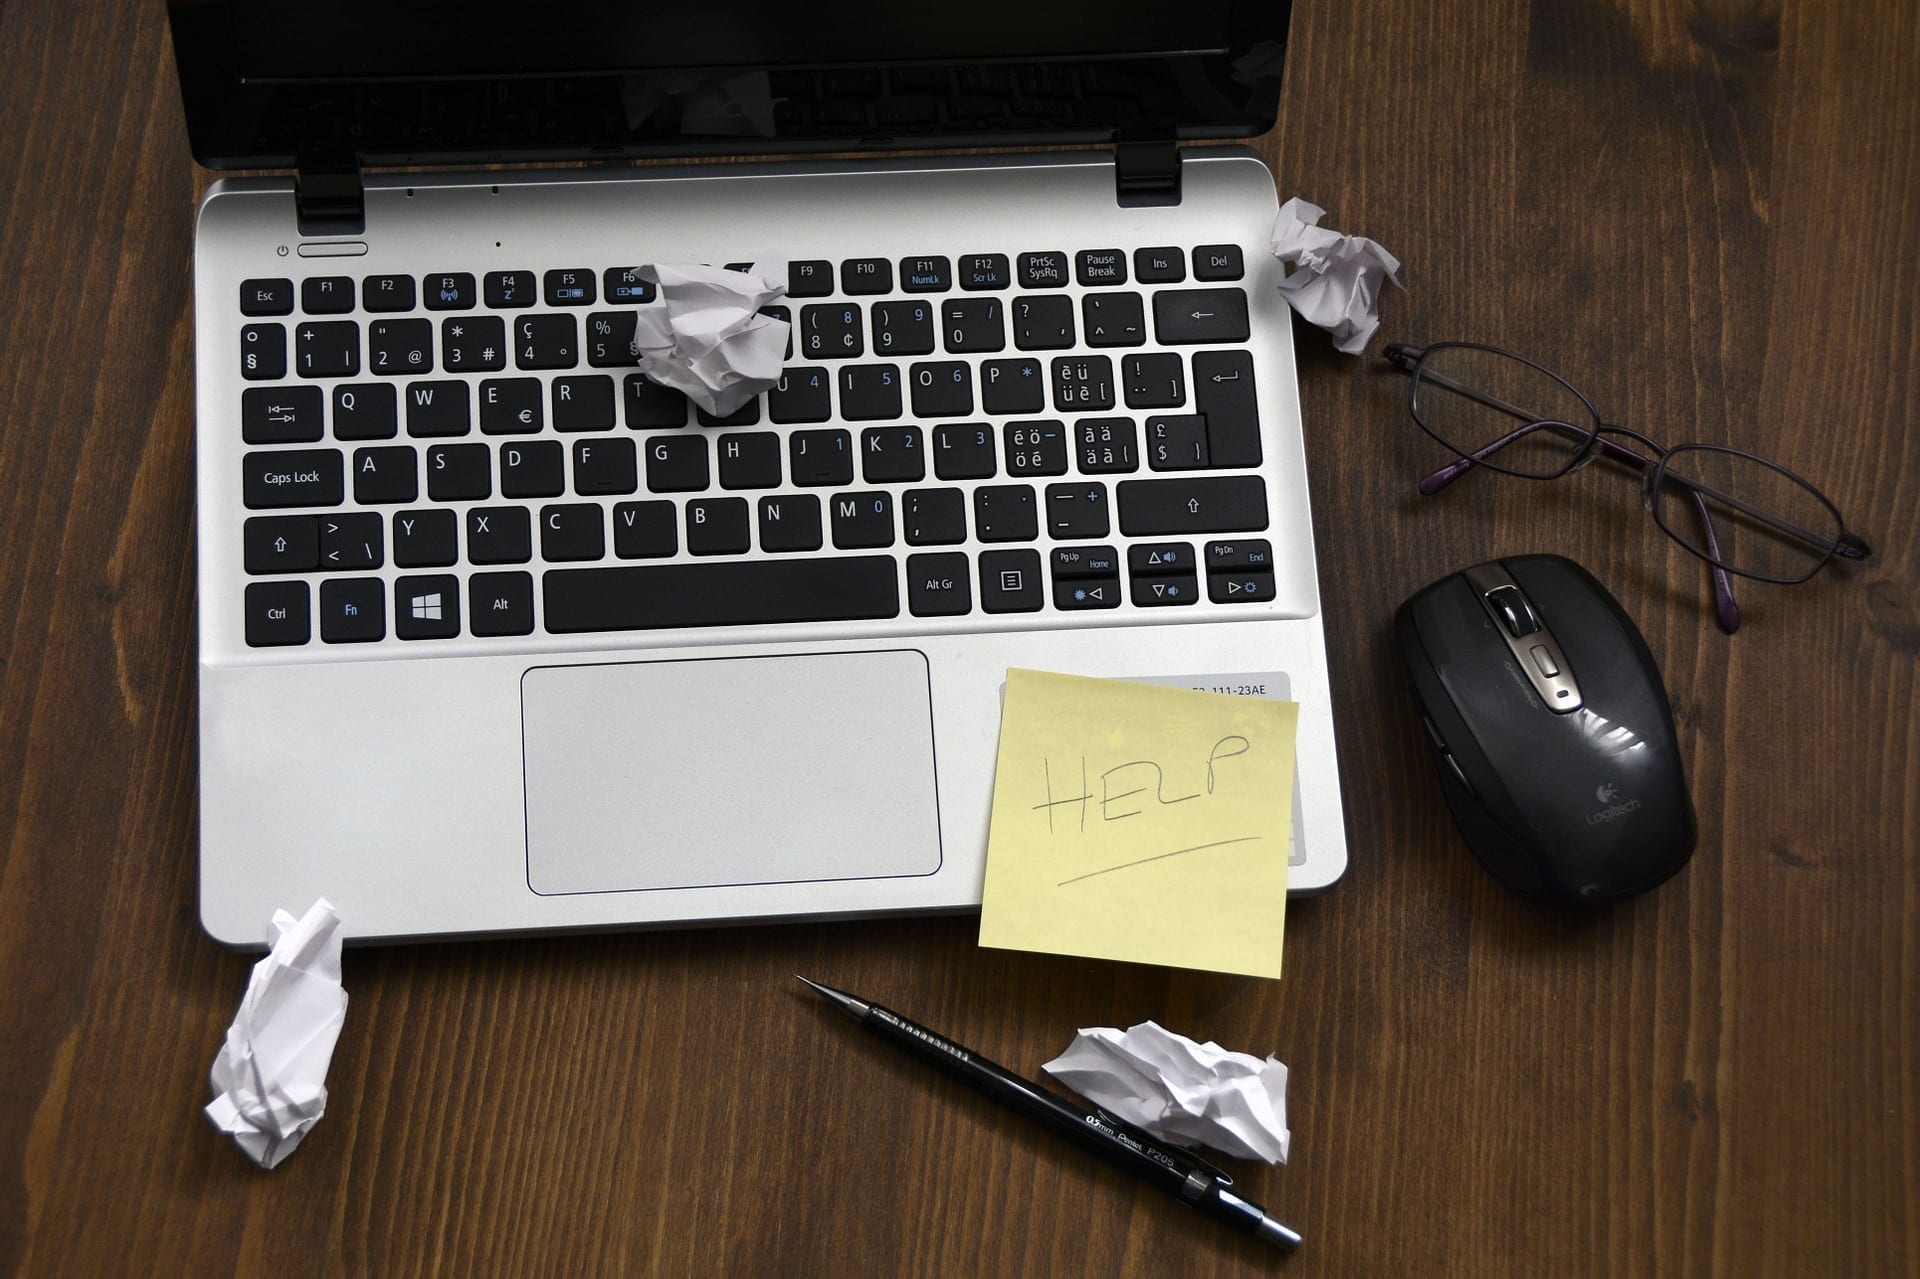 lap top open on wooden desk beside a mouse and reading glasses. Balled up papers litter the keyboard and a yellow sticky note has the word HELP written on it underlined